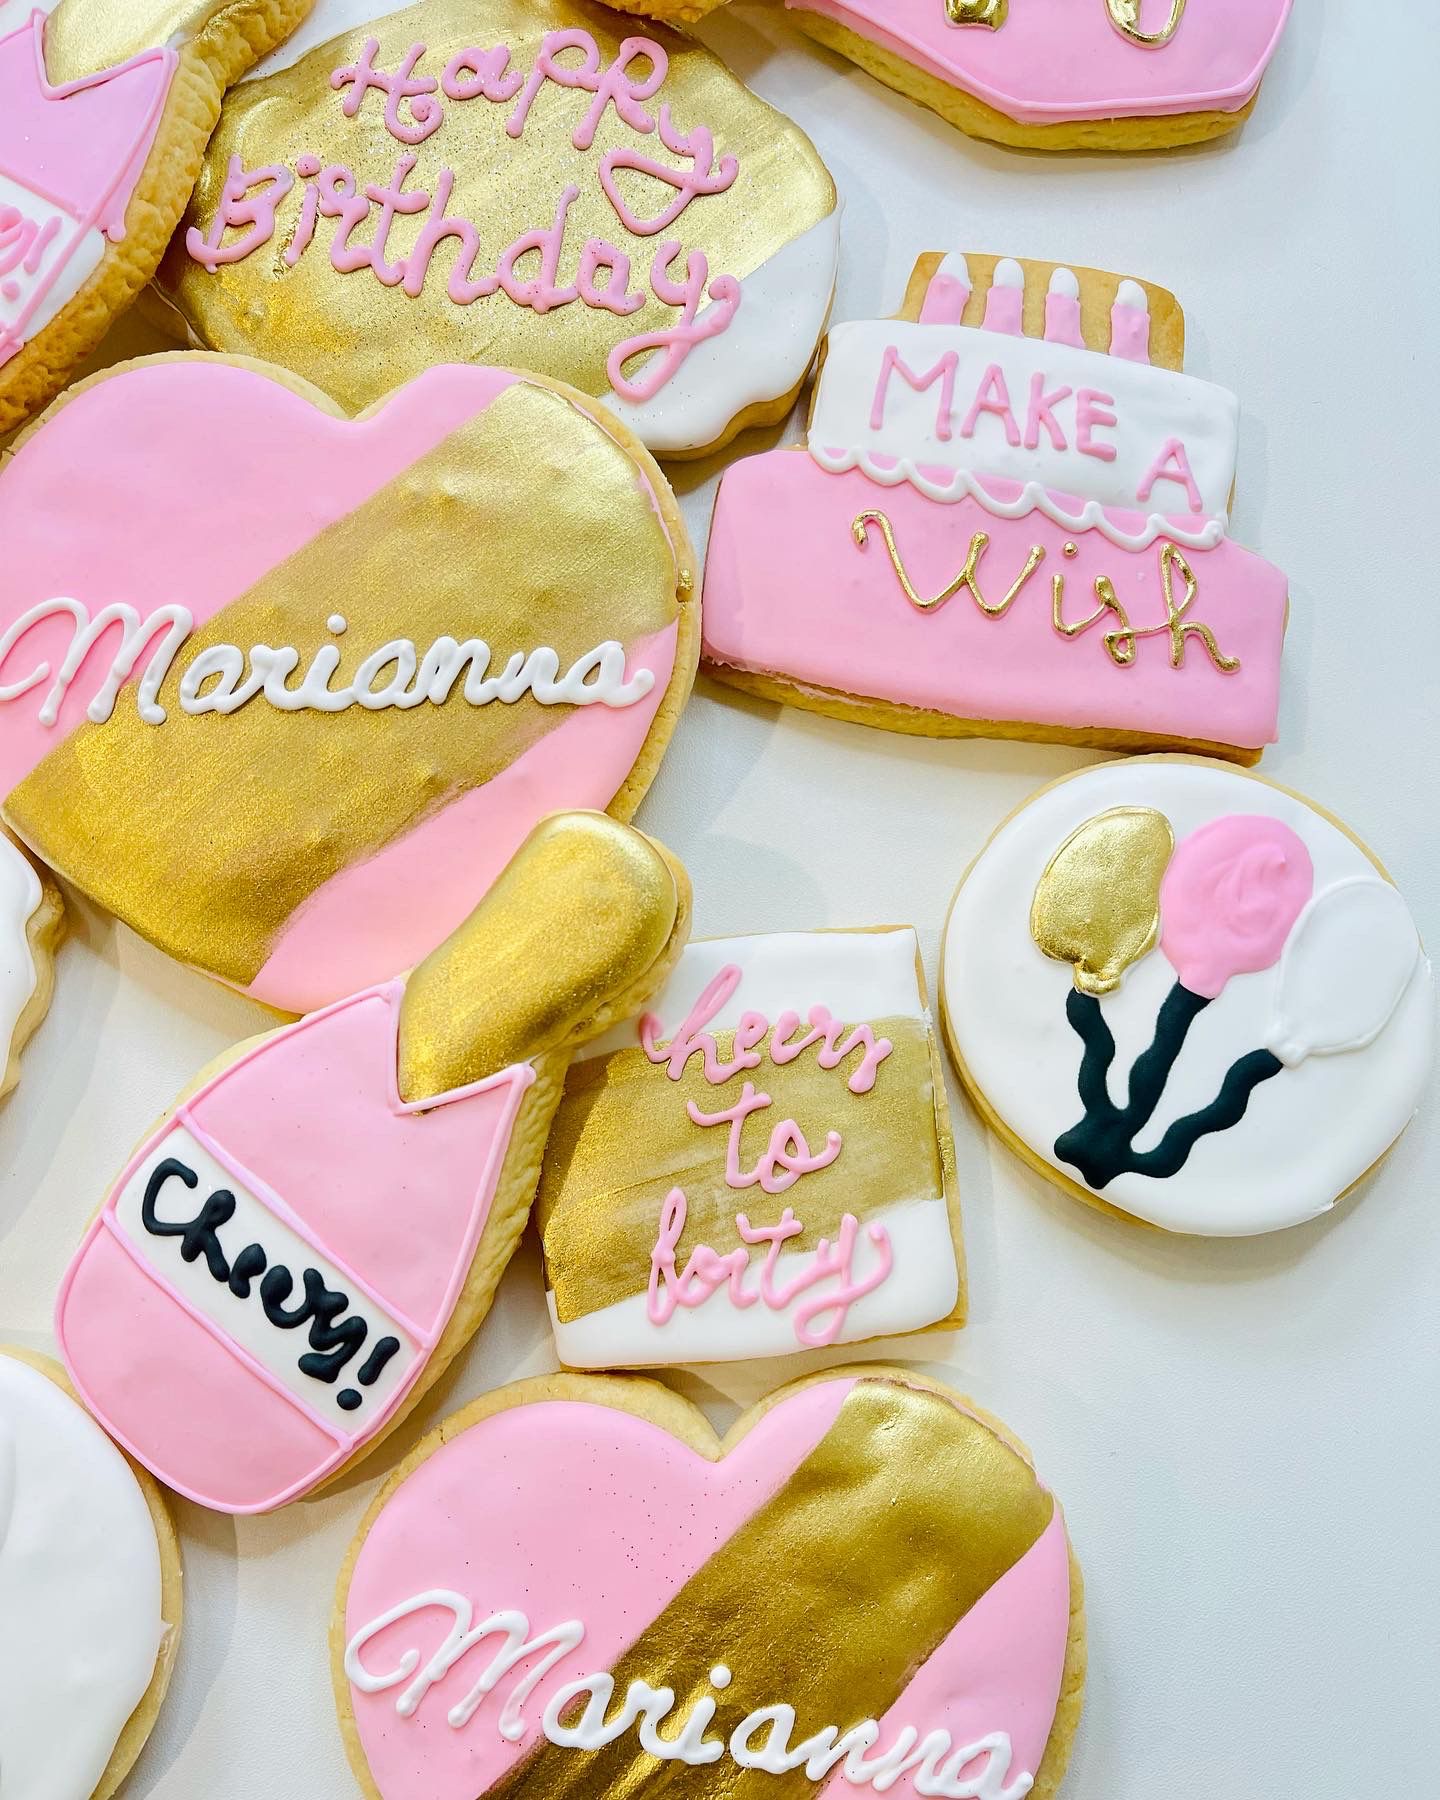 Make a wish and sparkle birthday cookies